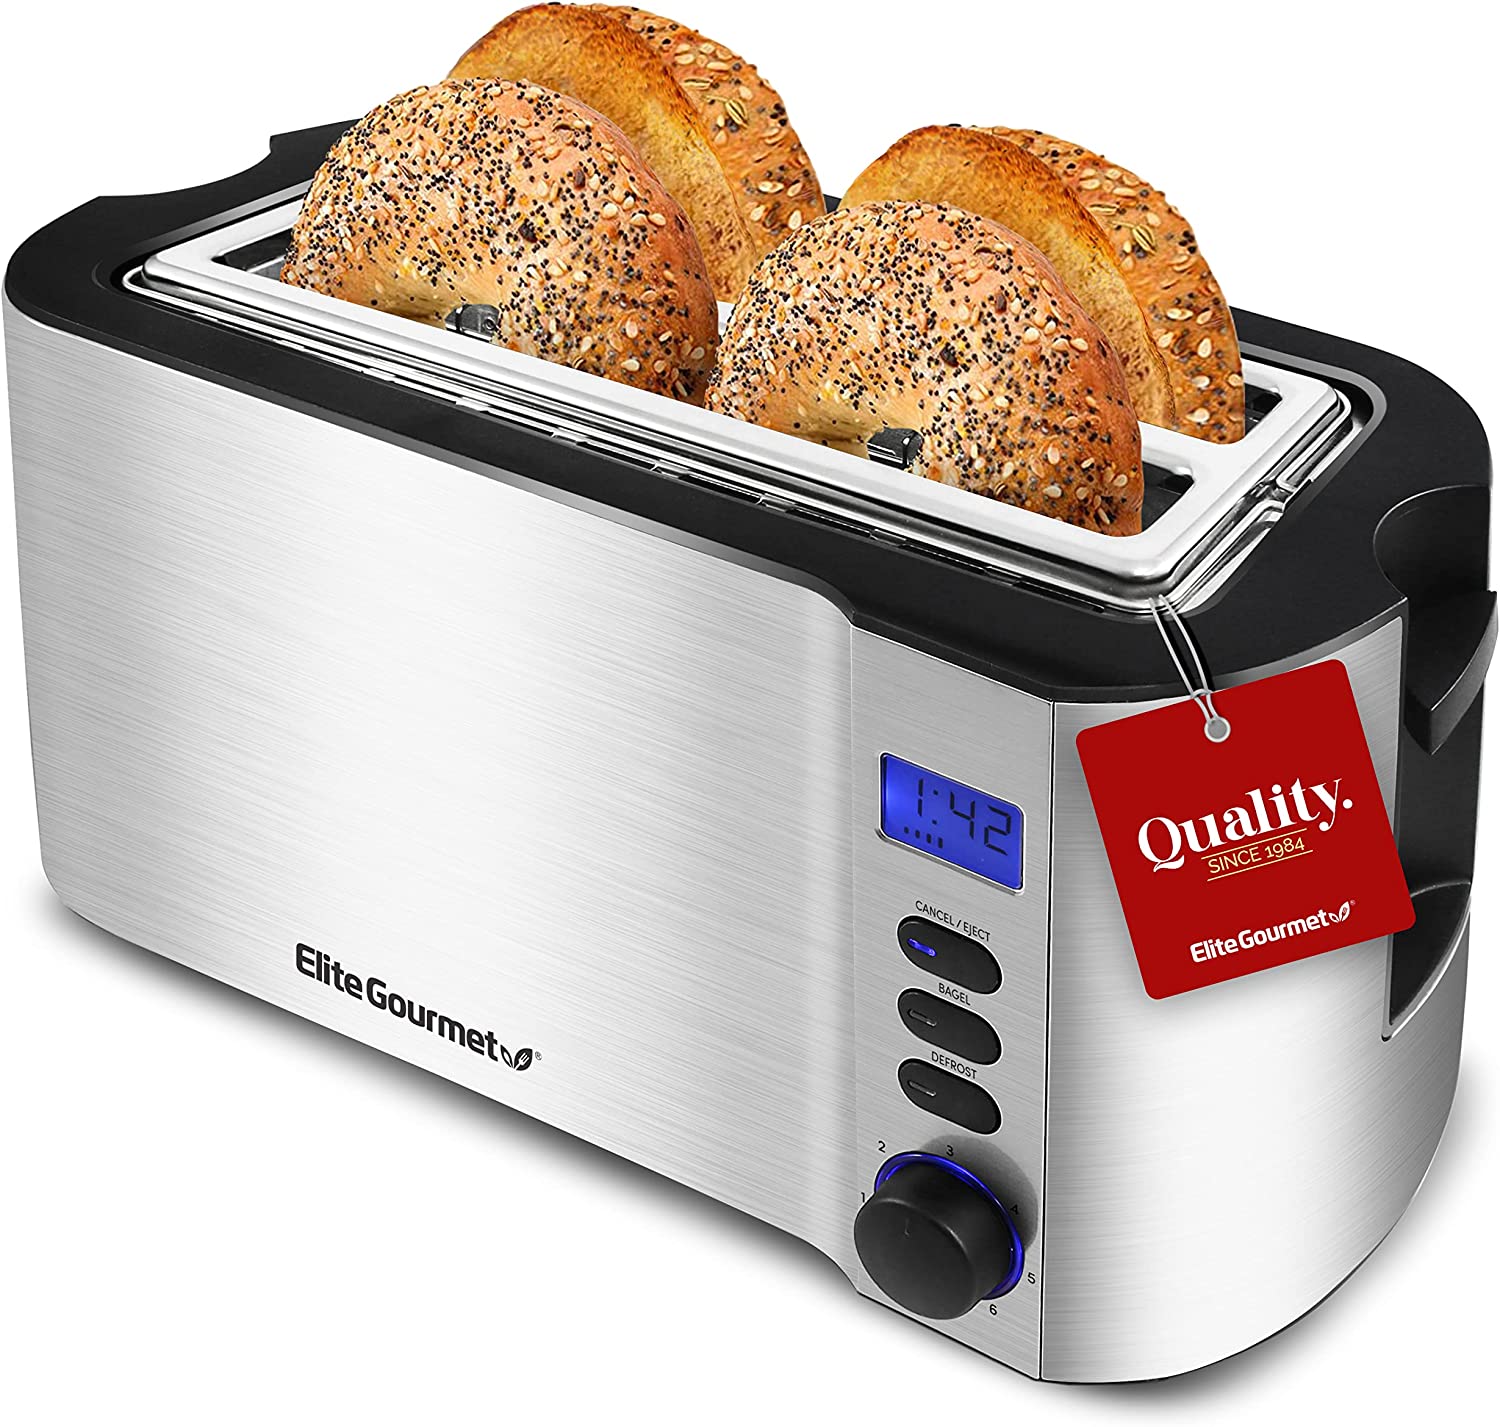 https://discounttoday.net/wp-content/uploads/2022/11/Elite-Gourmet-ECT4400B-Long-Slot-4-Slice-Toaster-Countdown-Timer-Bagel-Function-6-Toast-Setting-Defrost-Cancel-Function-Built-in-Warming-Rack-Extra-Wide-Slots-for-Bagel-Waffle-Stainless-Steel.jpg